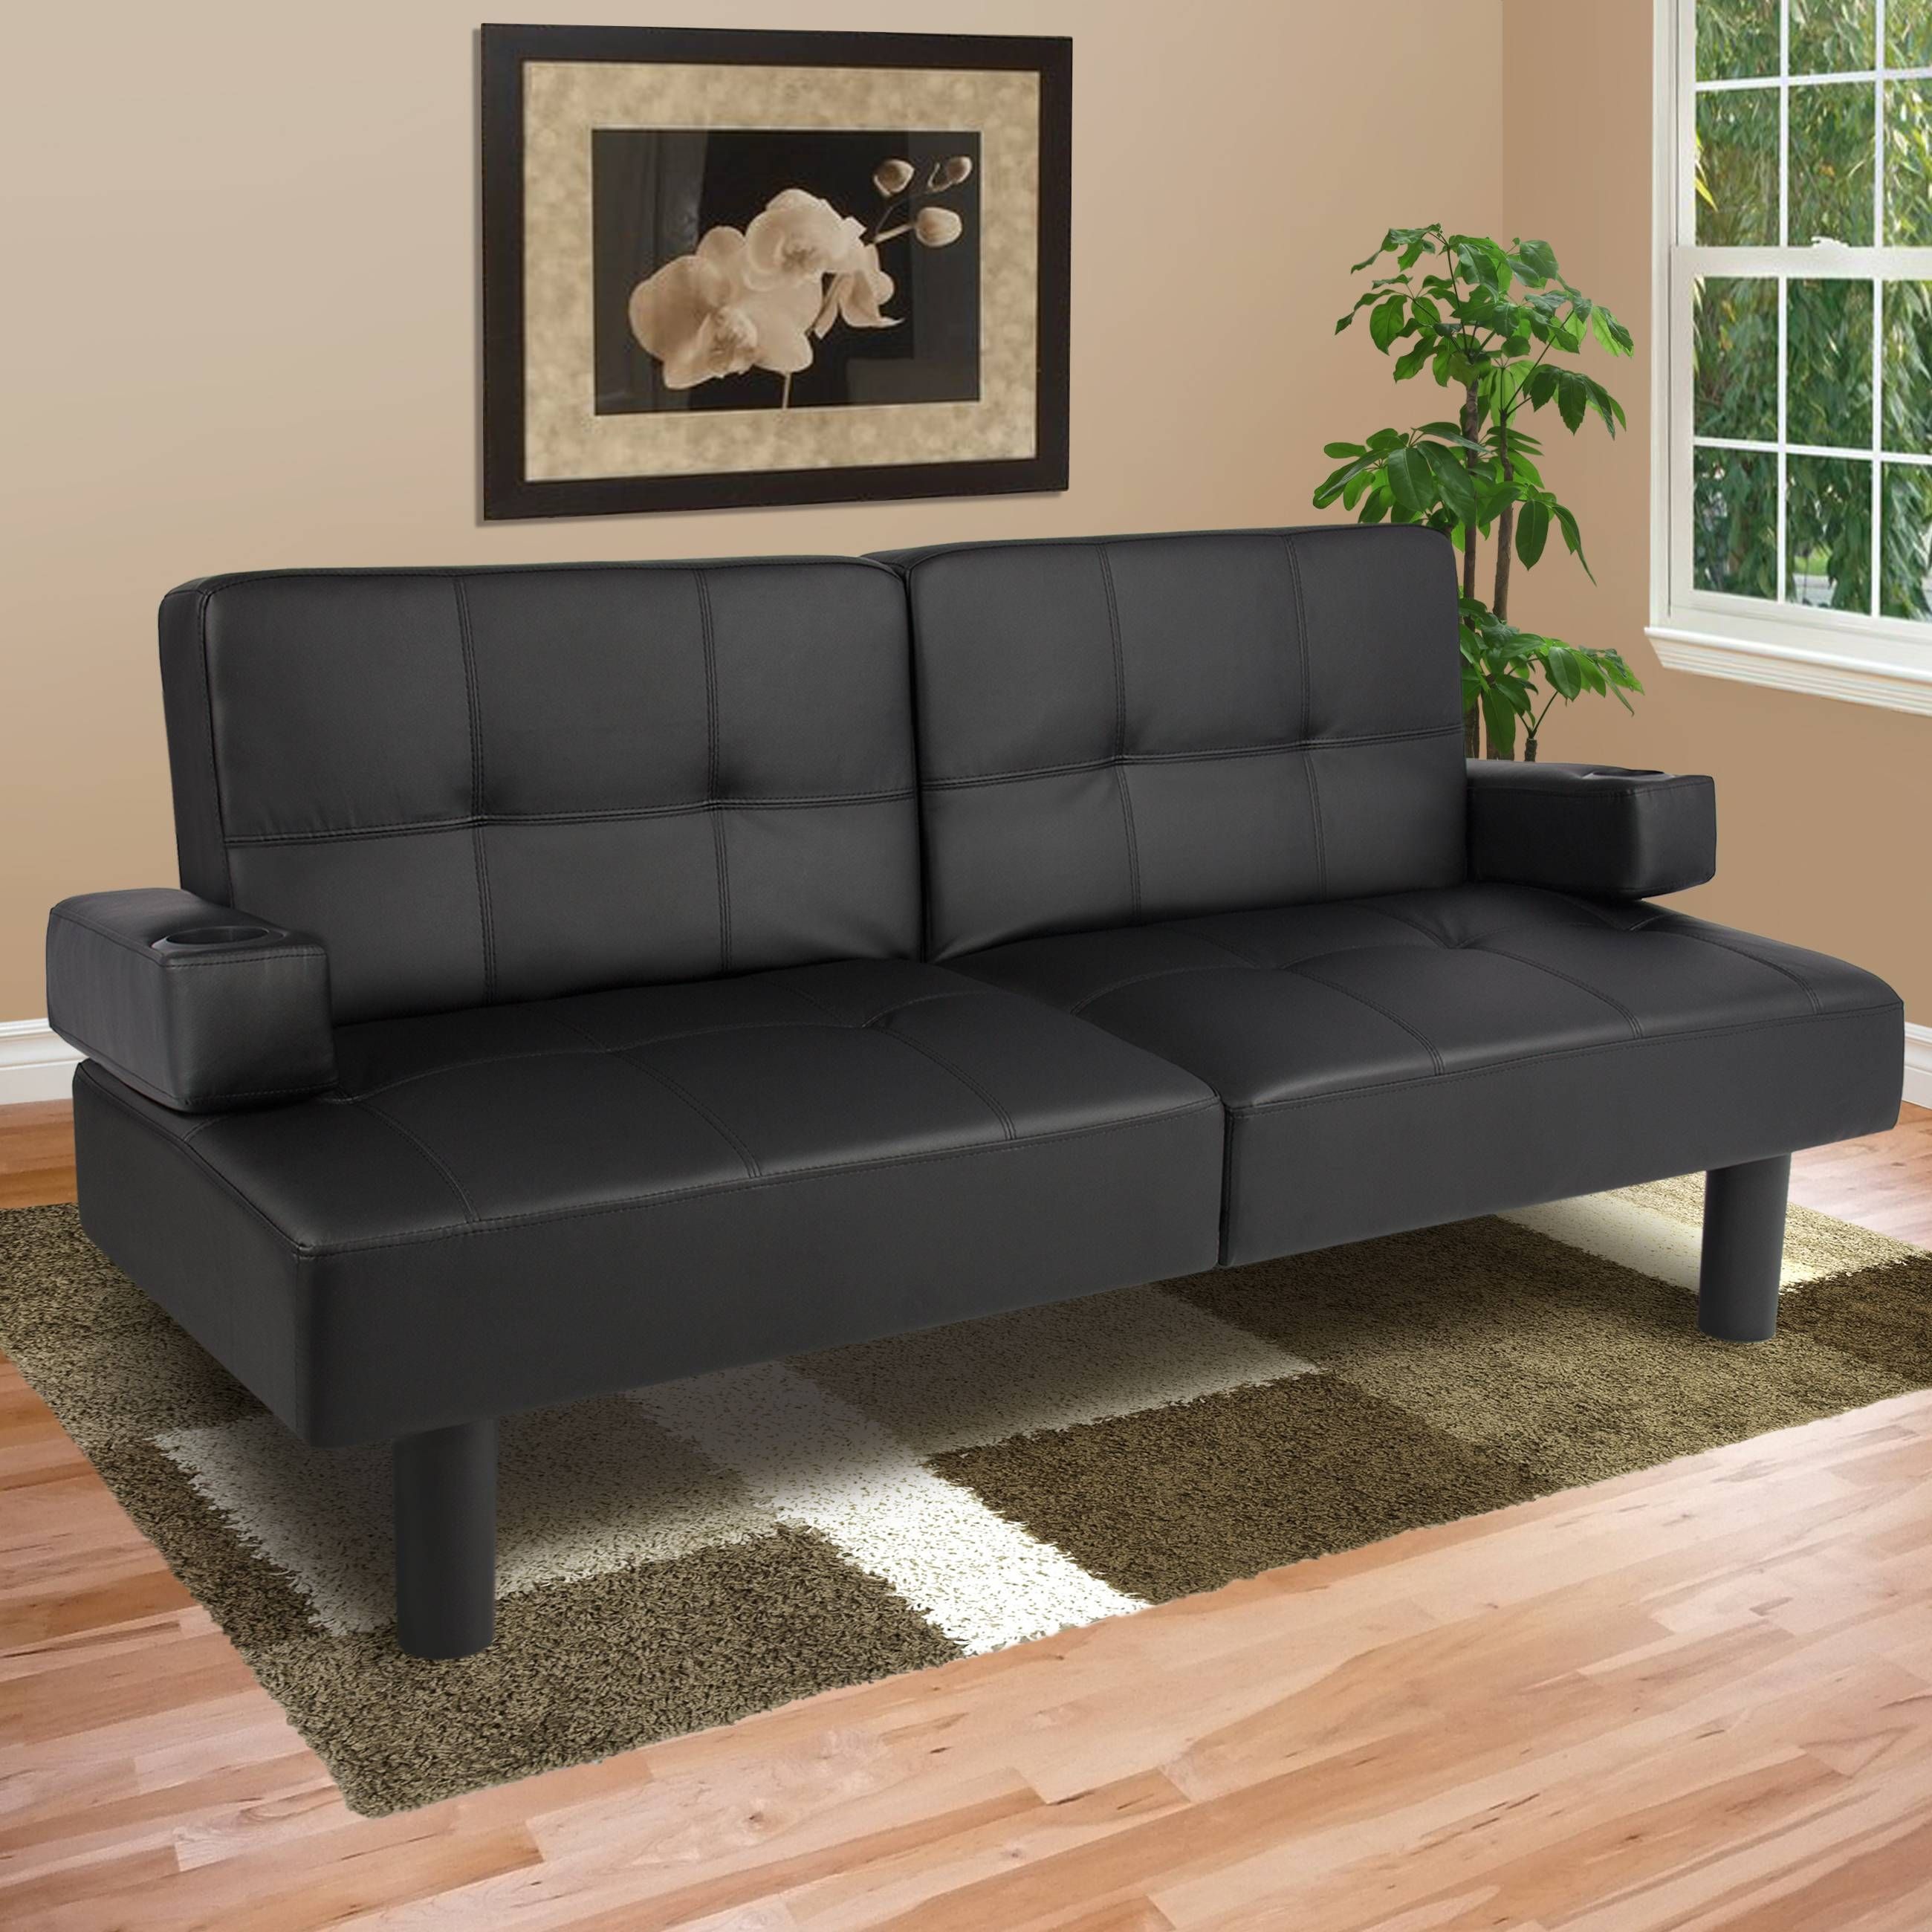 Leather Faux Fold Down Futon Sofa Bed Couch Sleeper Furniture For Sofa Lounger Beds (View 11 of 30)